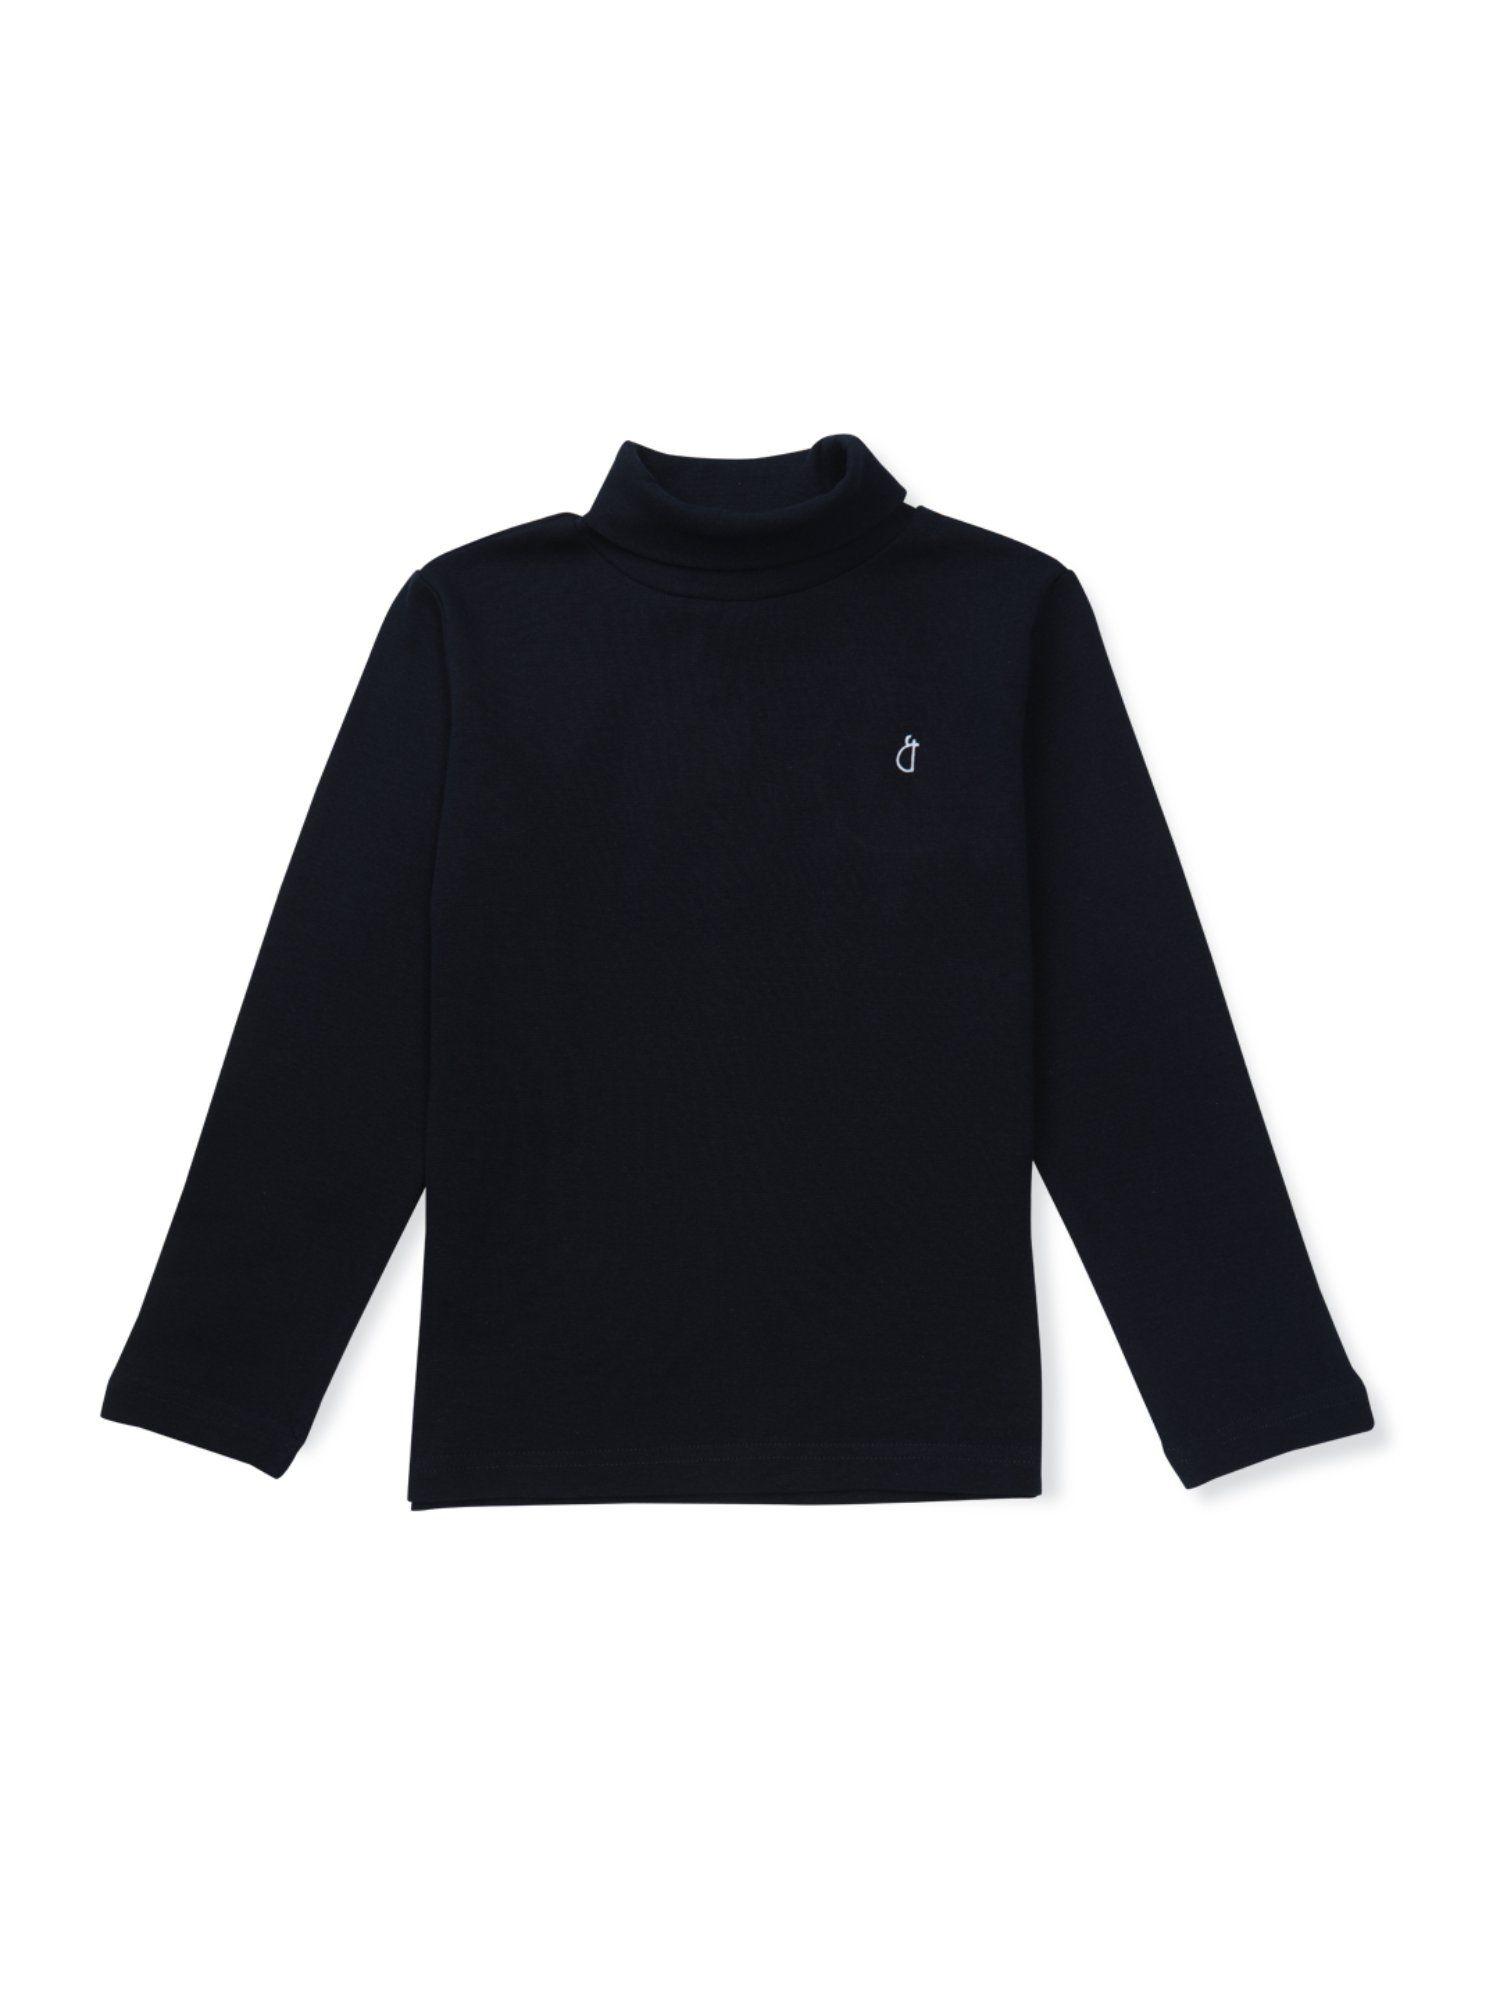 girls-navy-blue-solid-cotton-skivvy-full-sleeves